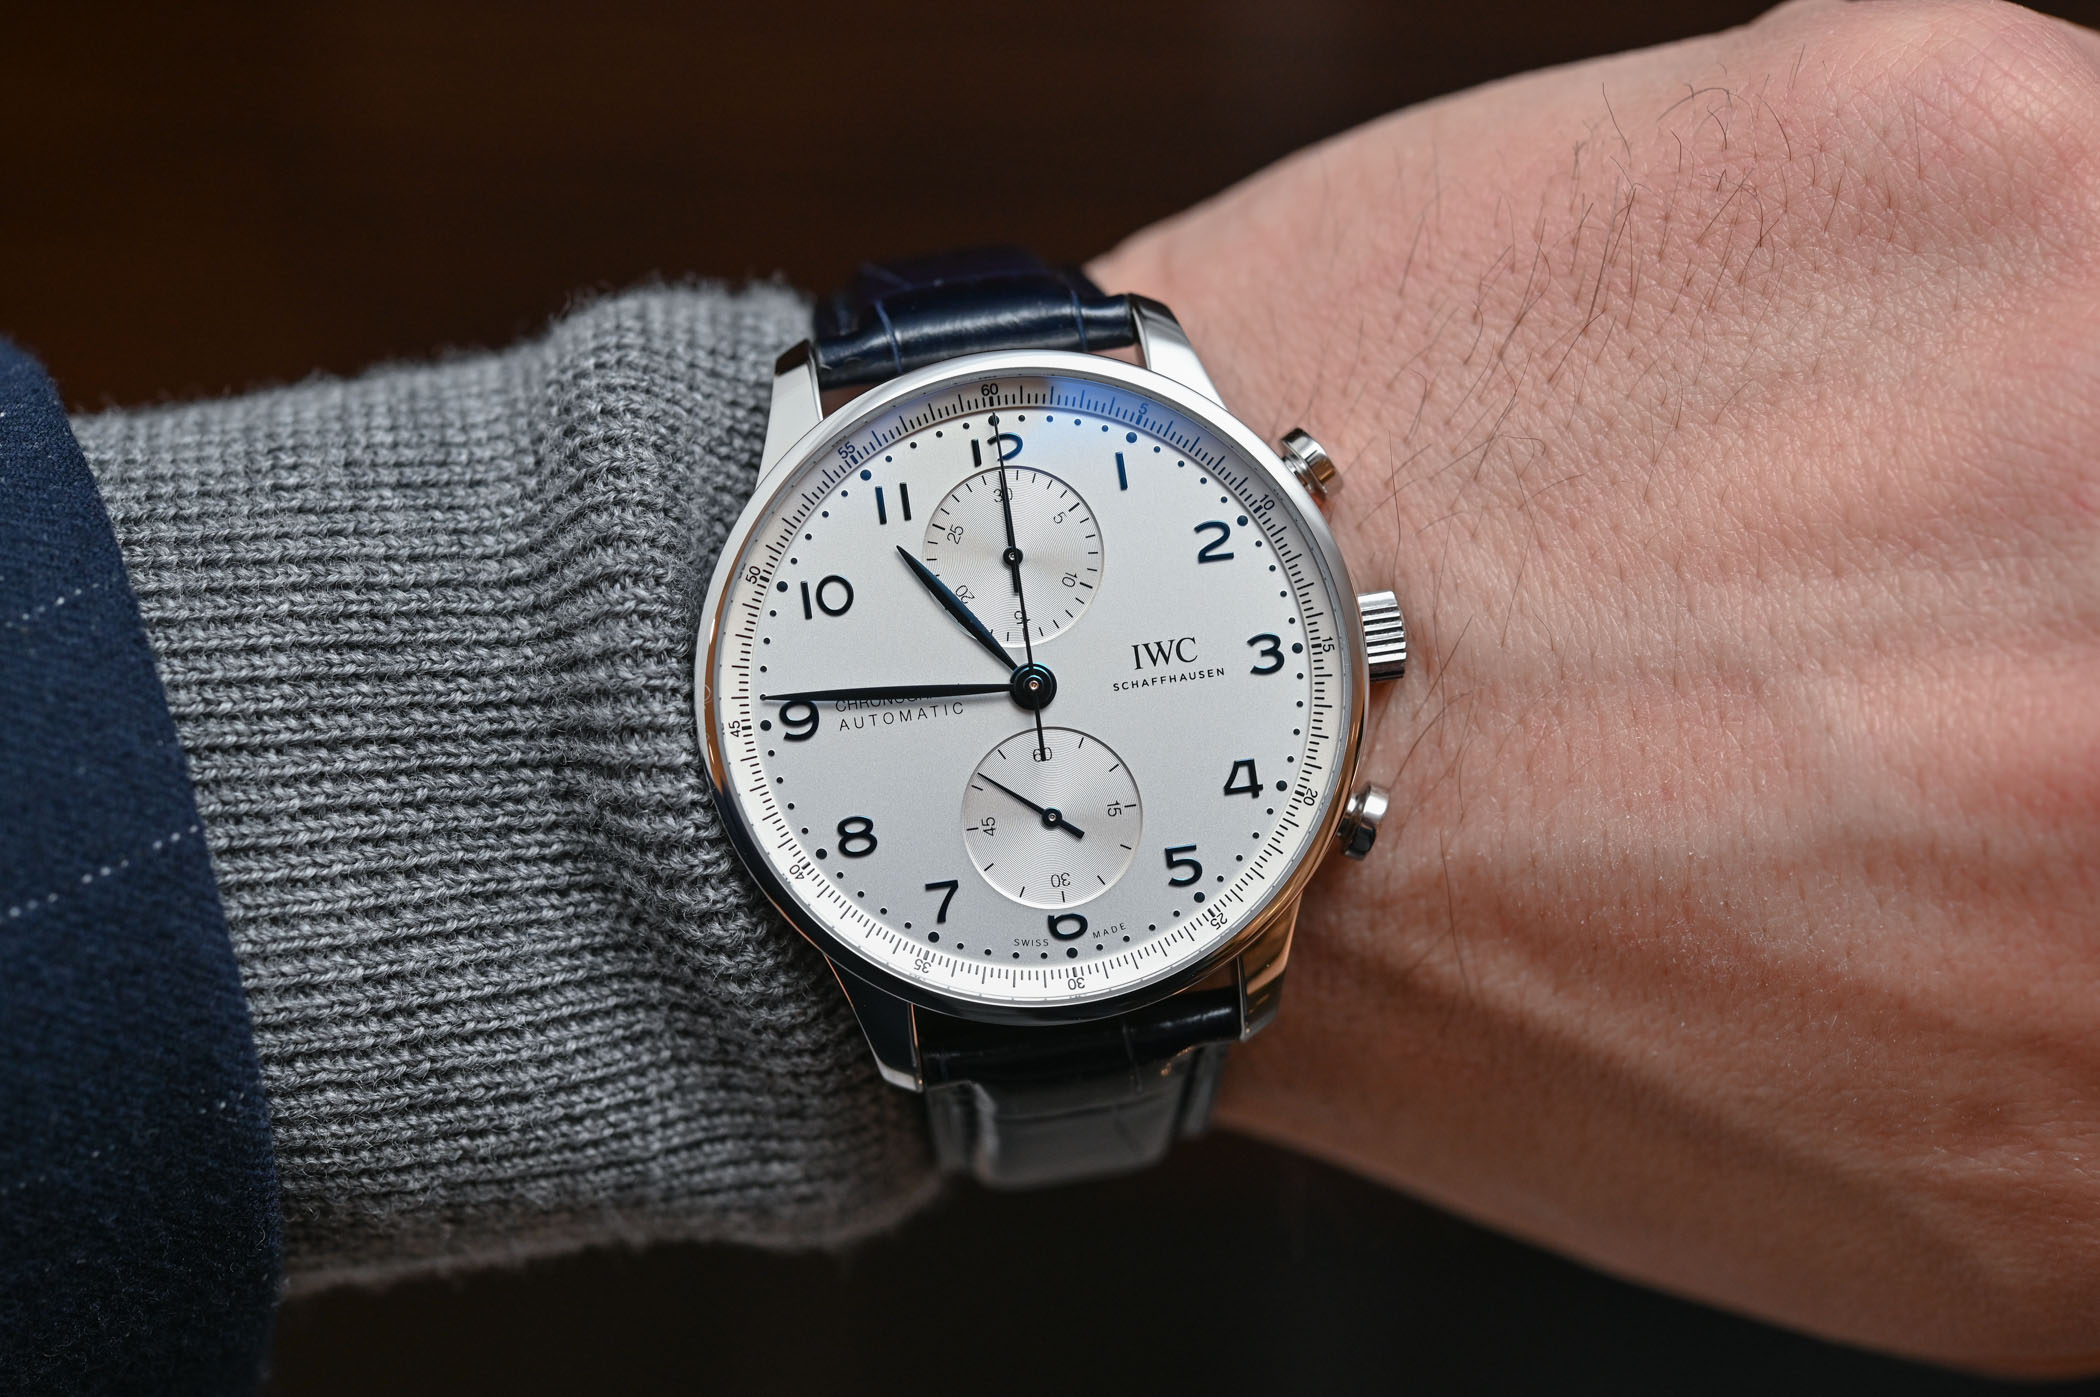 IWC Portugieser Chronograph 3716 in-house movement